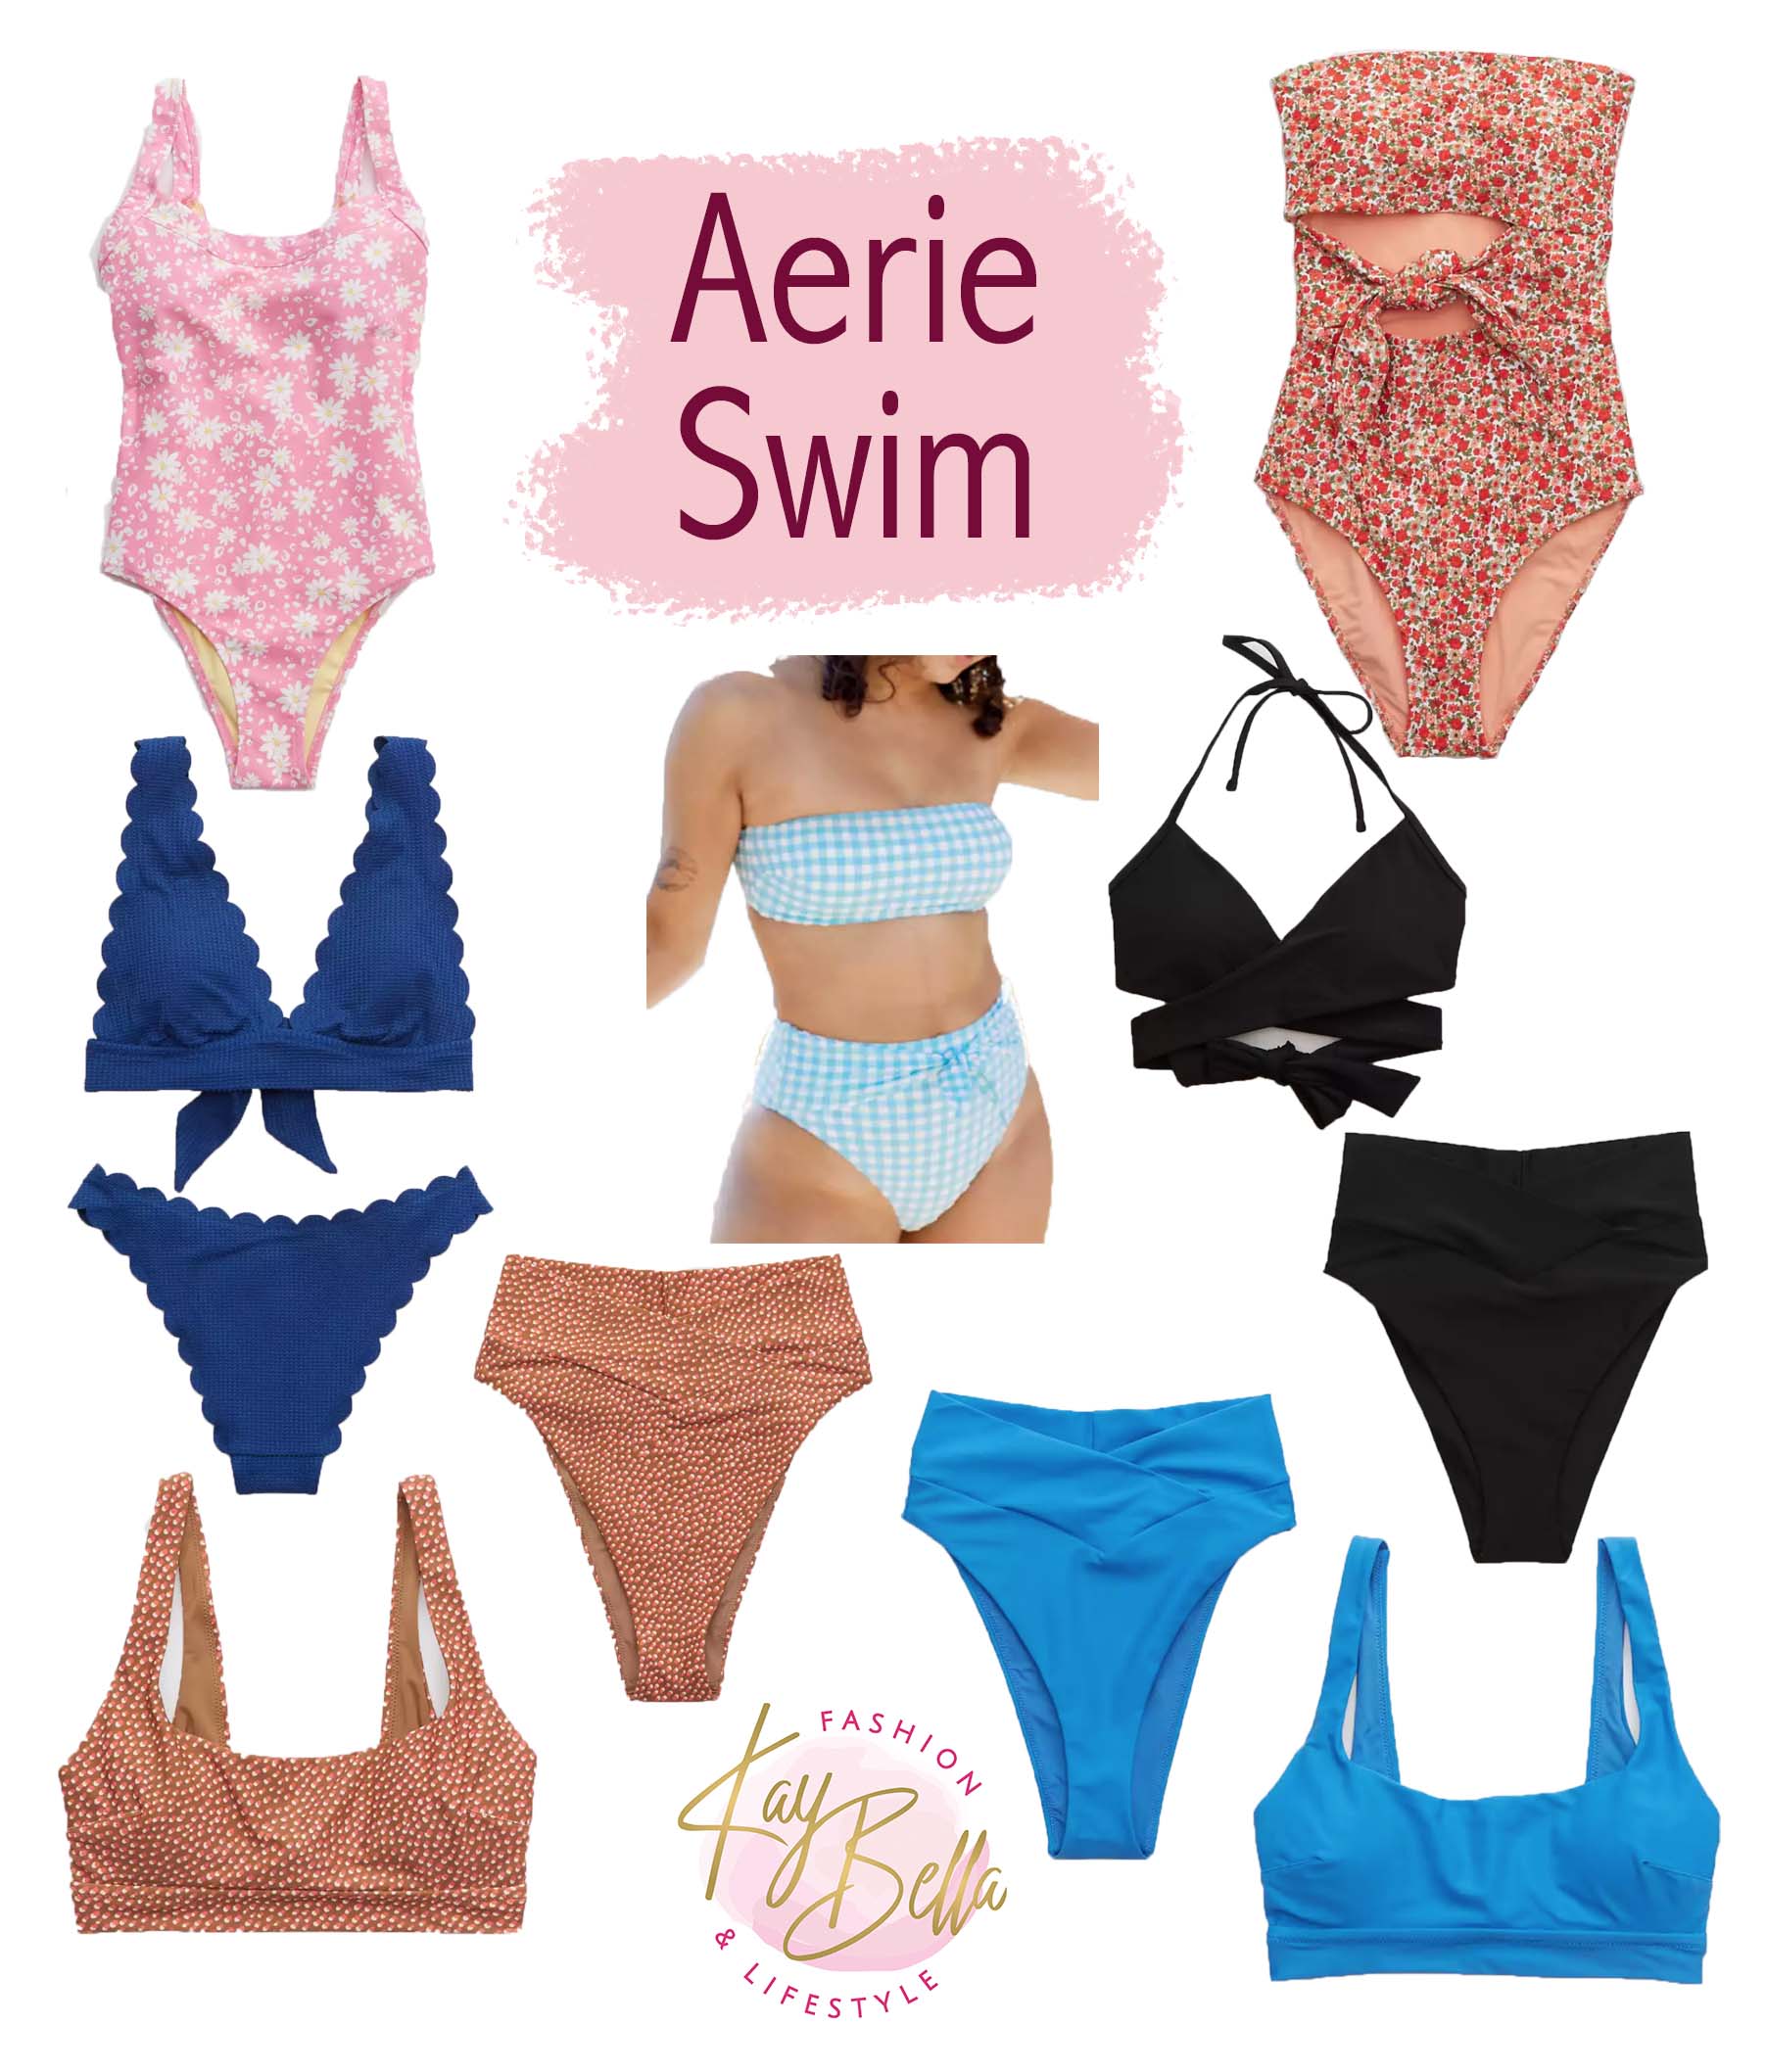 My favorite style of thong from Aerie (which is why I have one in